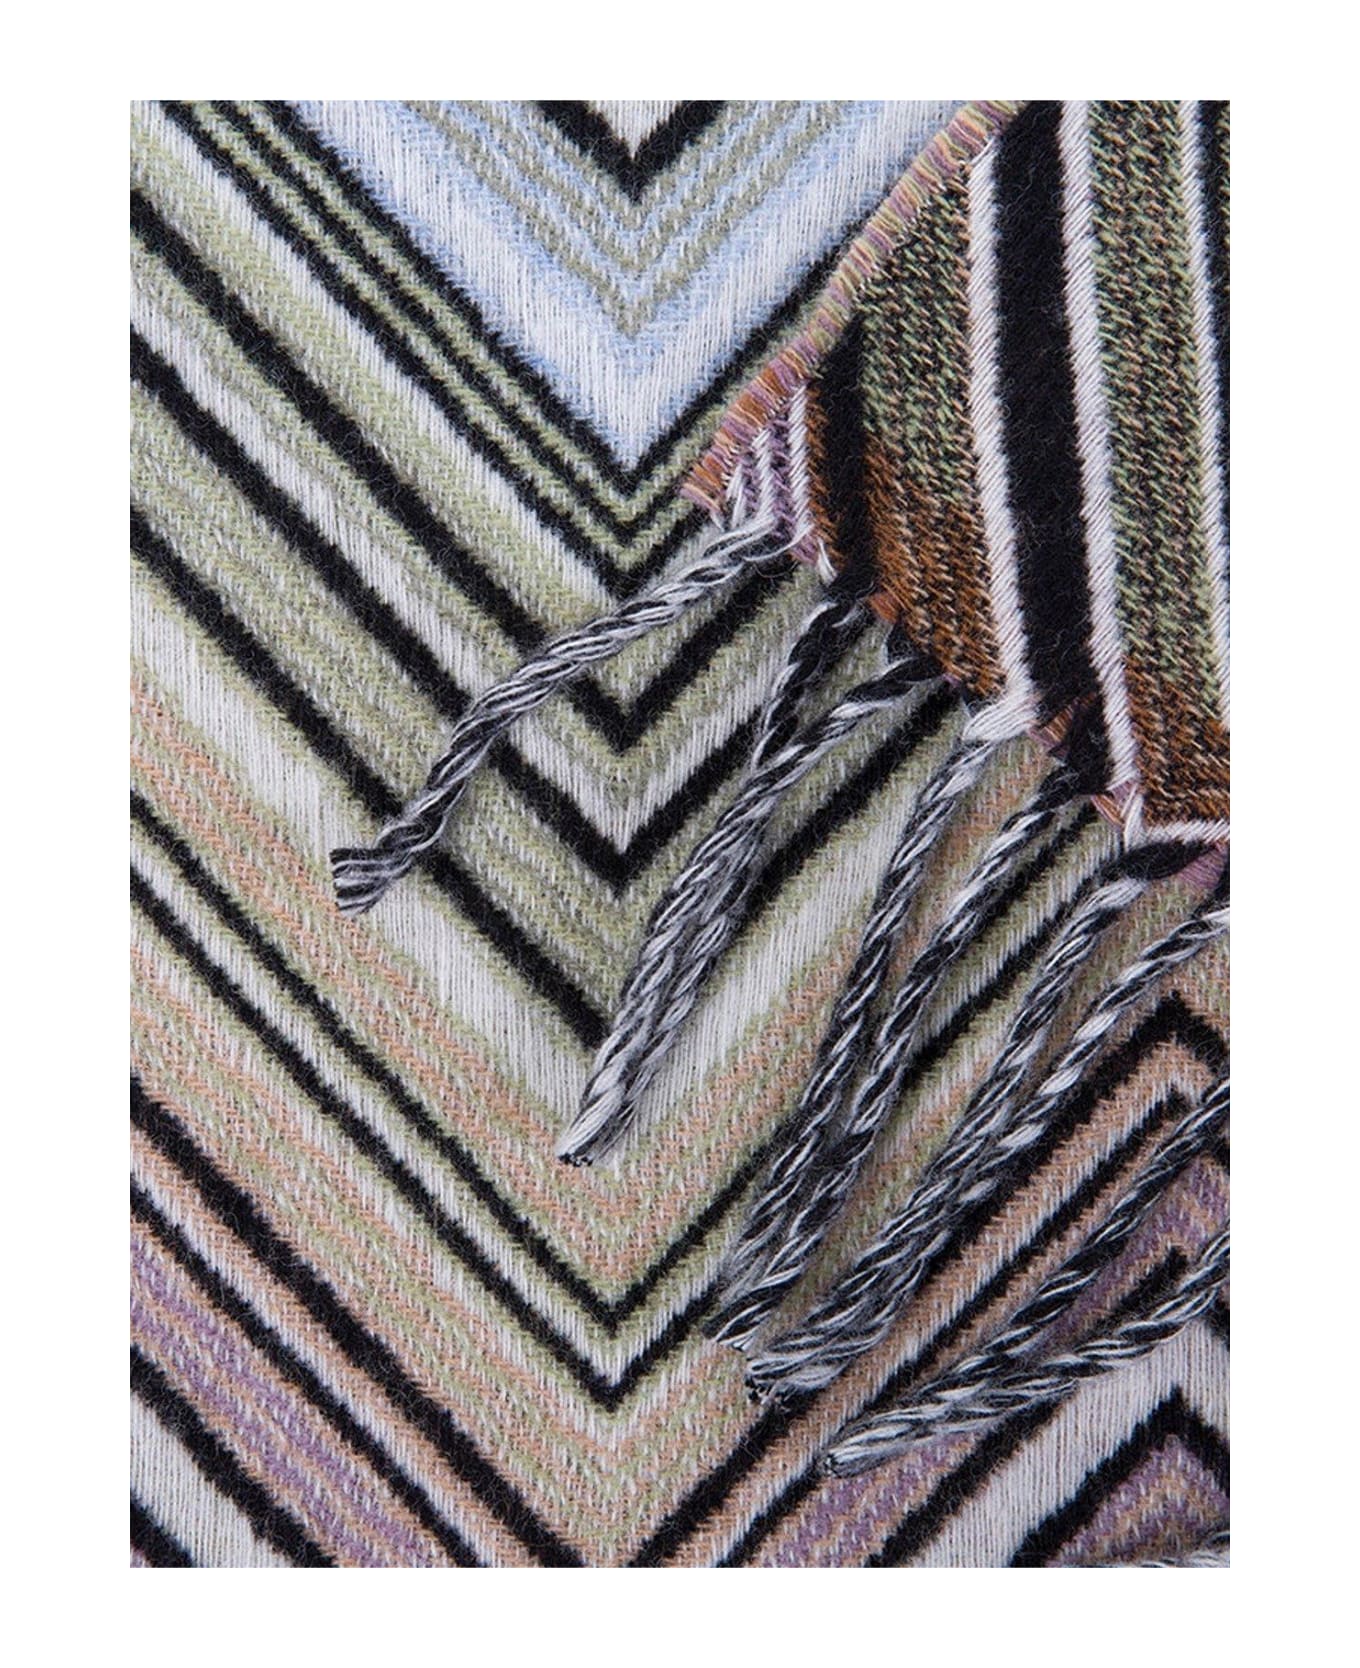 Missoni Perseo Zig-zag Patterned Throw - BLUE/GREEN